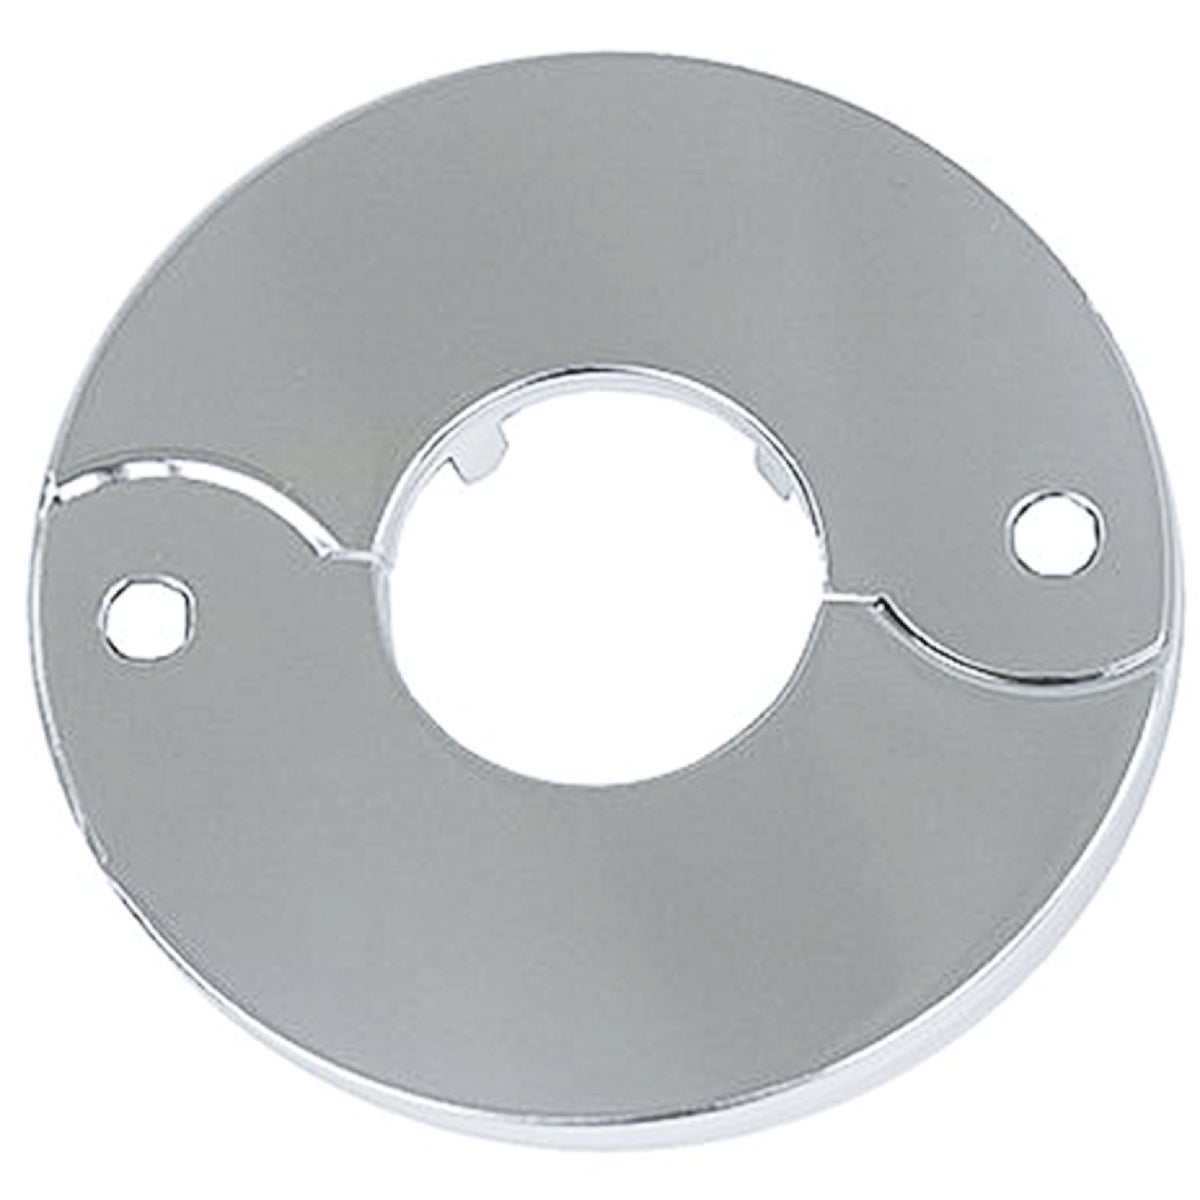 Lasco Chrome-Plated 1 In. IP or 1-3/8 In. ID Split Plate